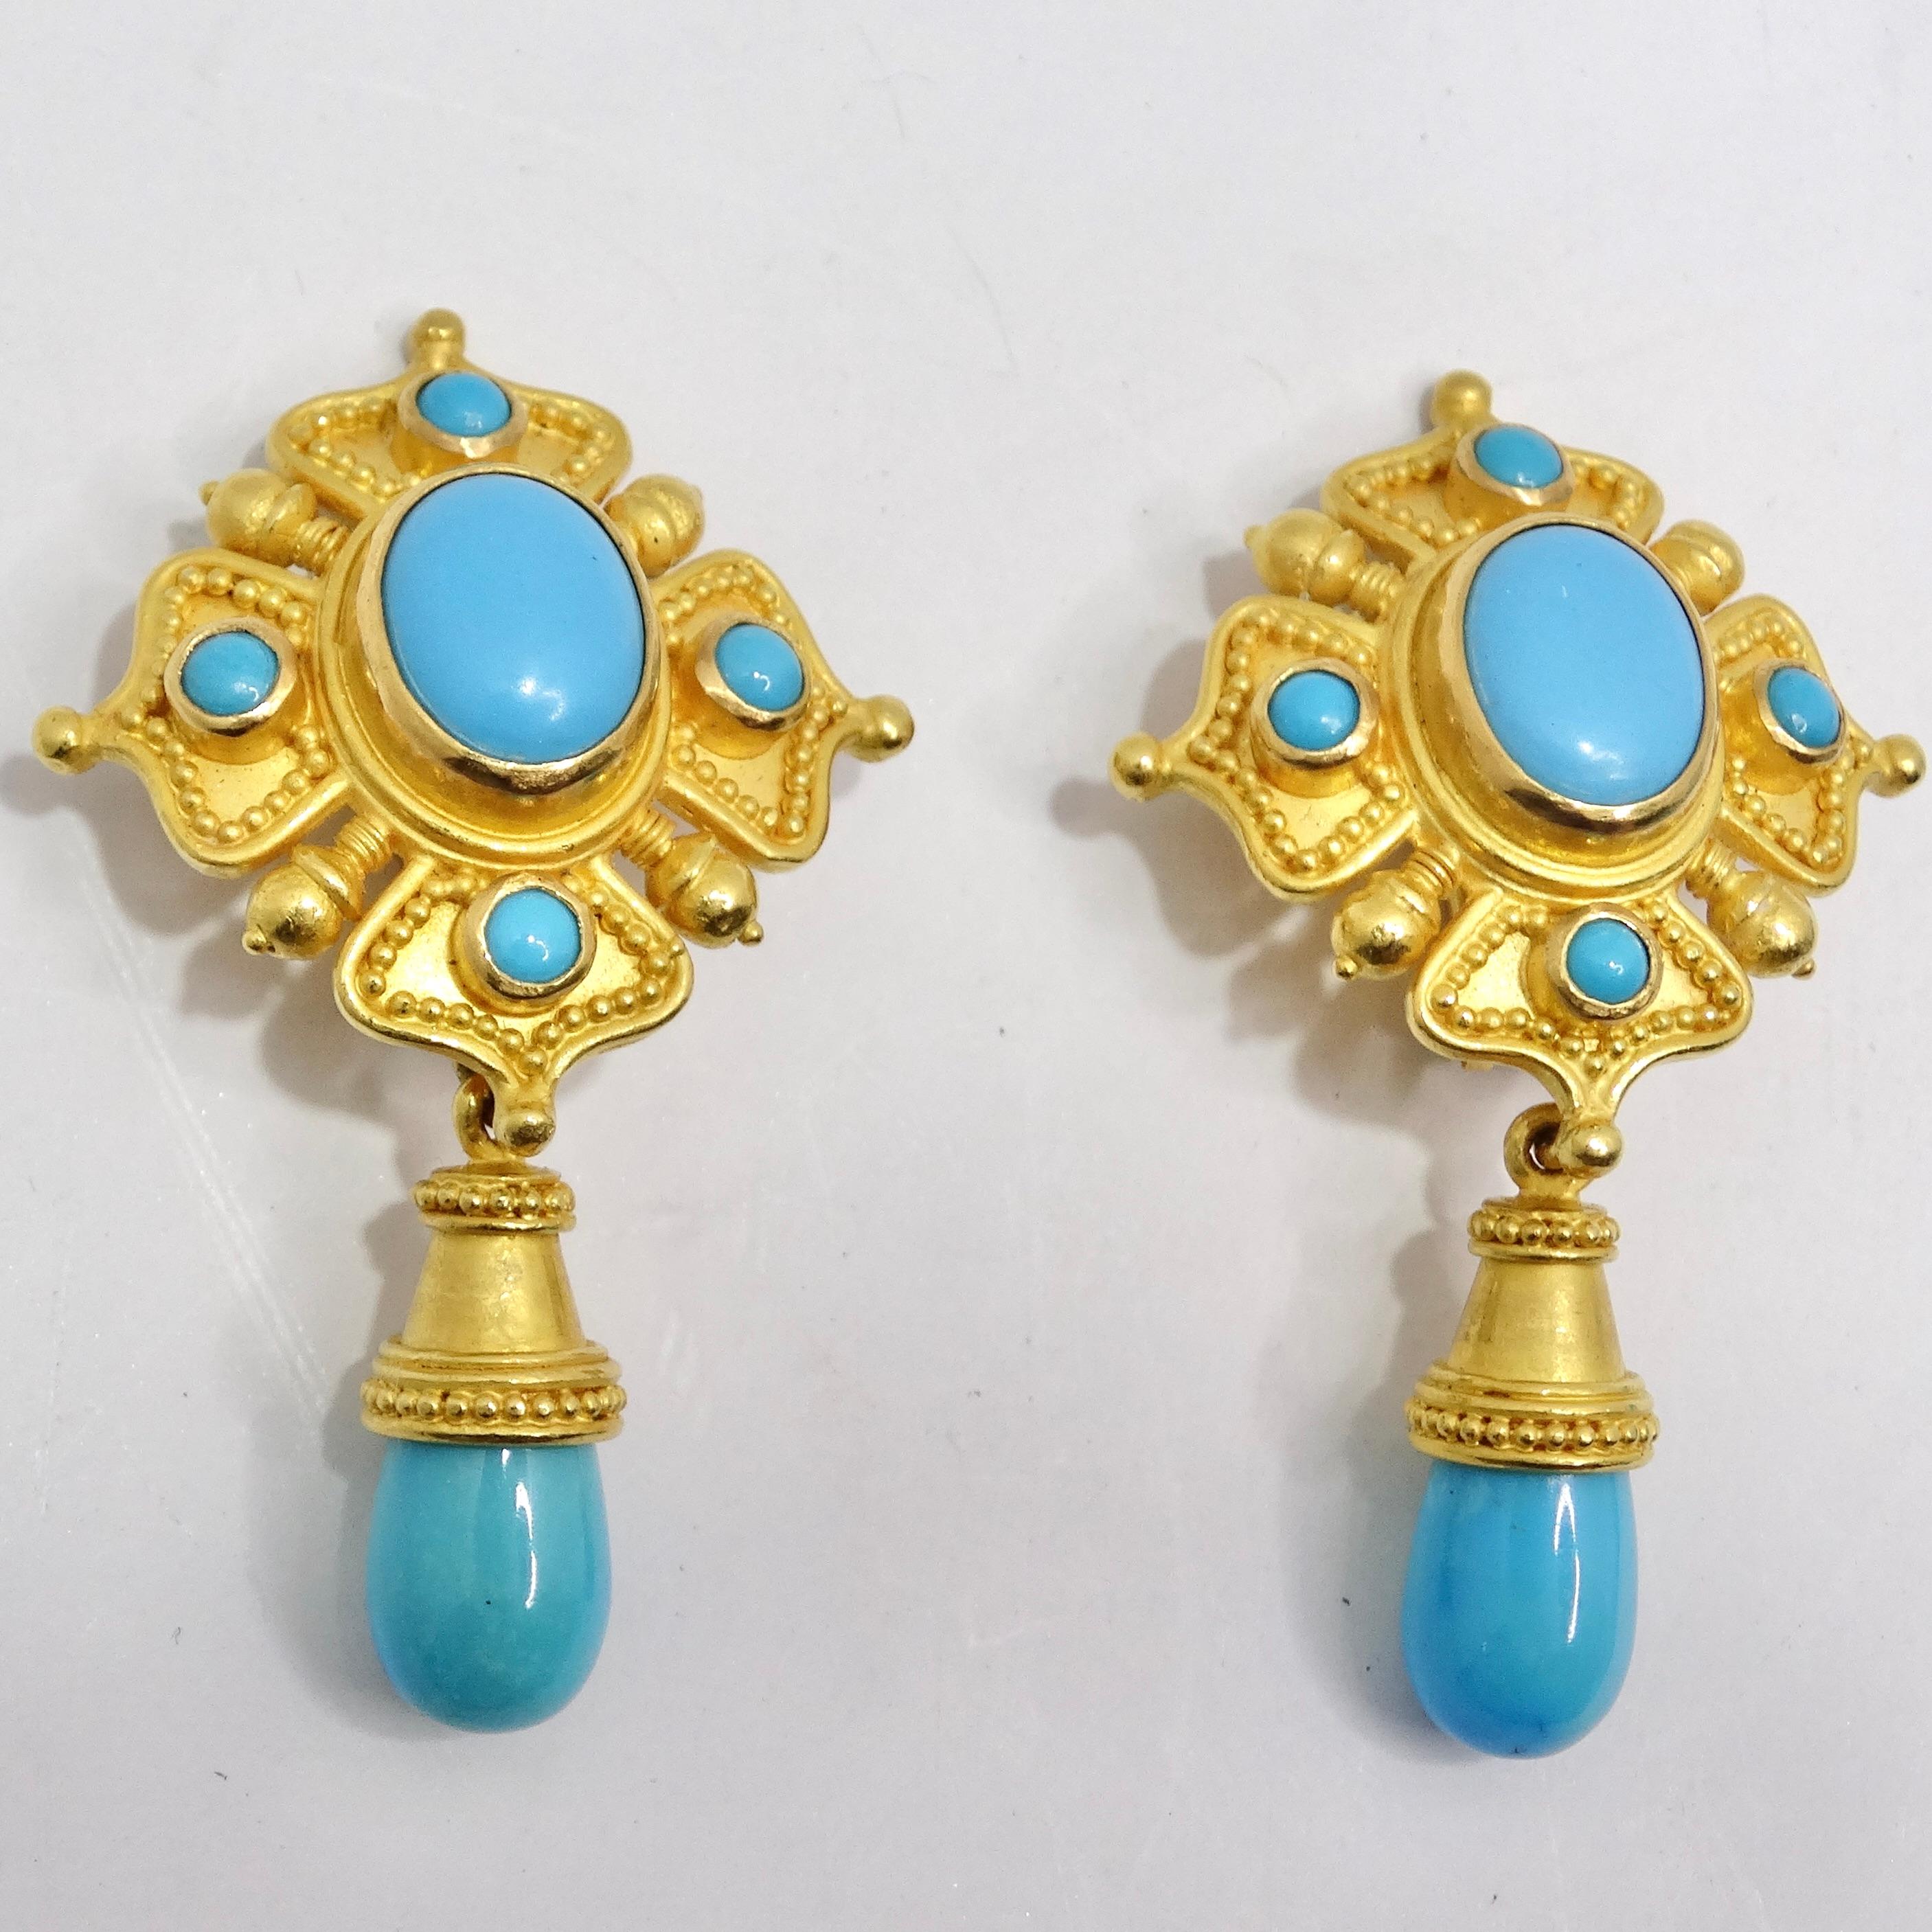 Introducing the Carolyn Tyler 22K Gold Sleeping Beauty Turquoise Dangle Earrings, a stunning pair of earrings that effortlessly combines luxury and natural beauty. These dangle earrings are a masterpiece of design and craftsmanship. The luxurious